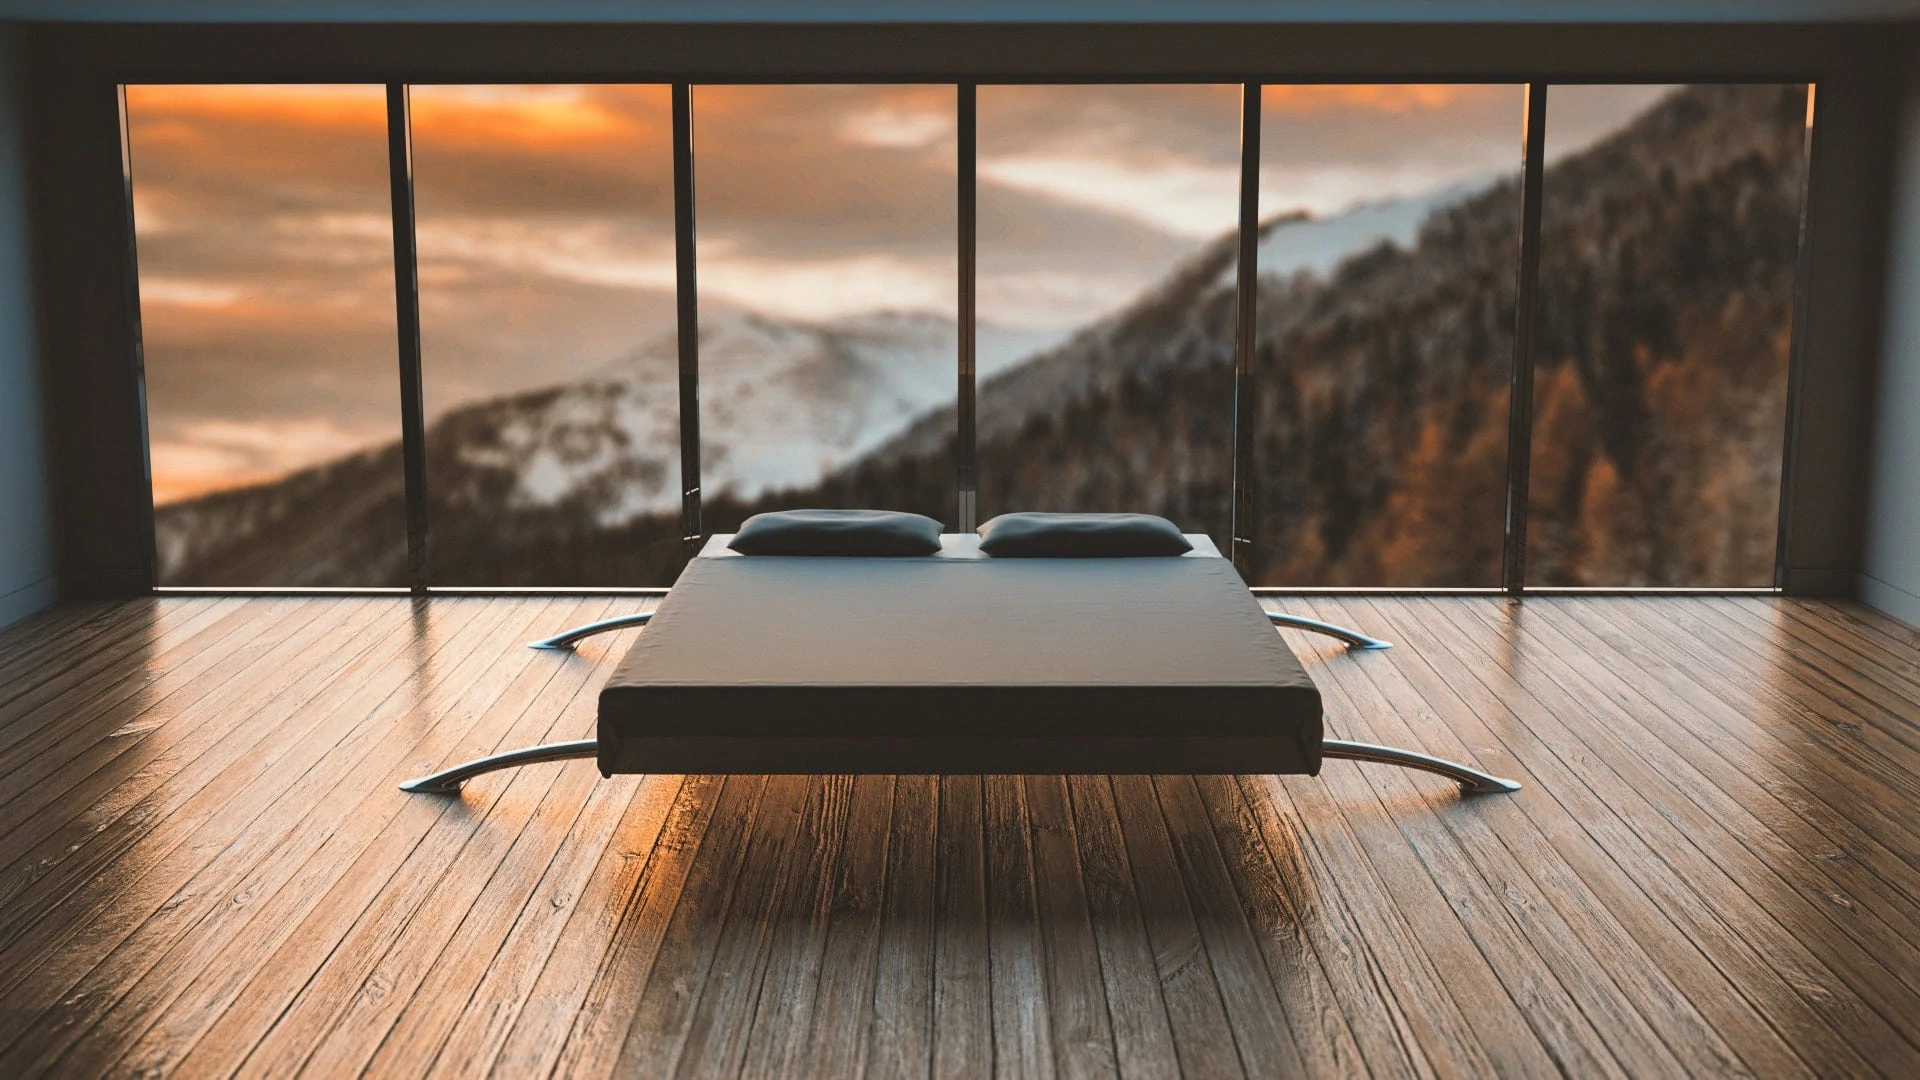 Healthy Buildings and OLED Lighting: The Next Green Trend for Hotels | OLEDWorks